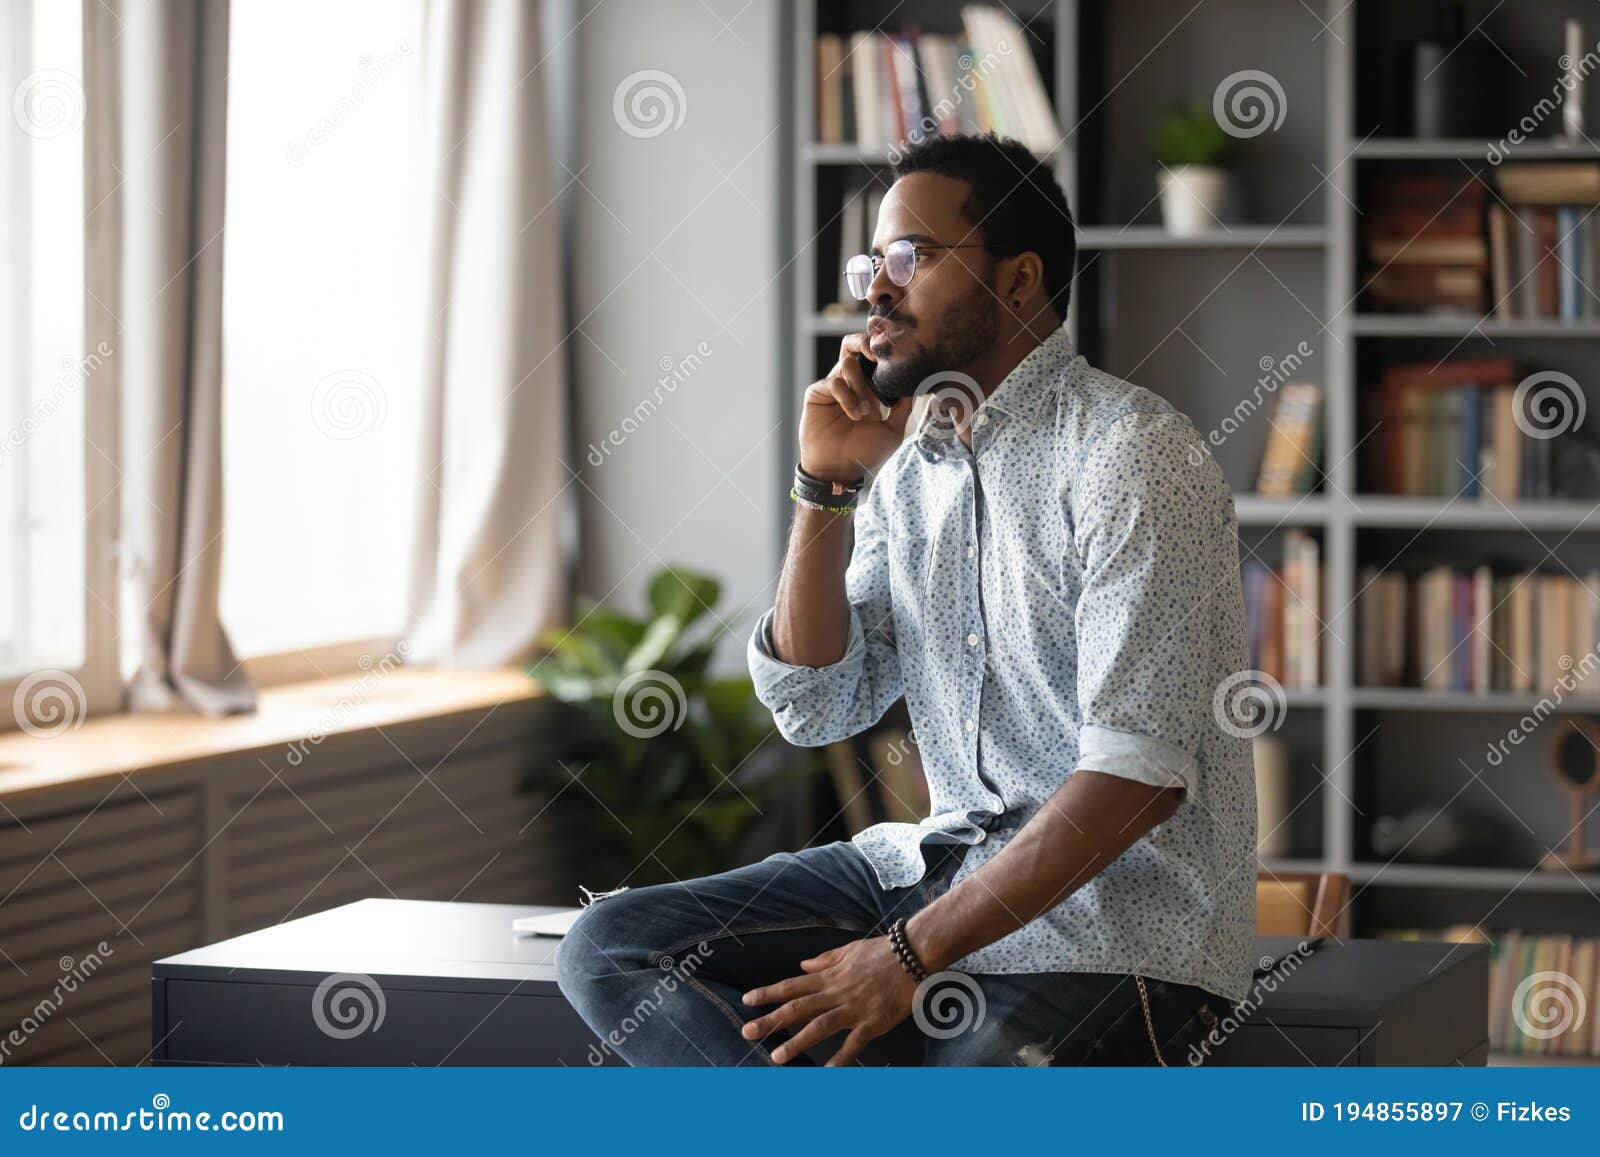 serious african american man talking on phone, sitting on desk